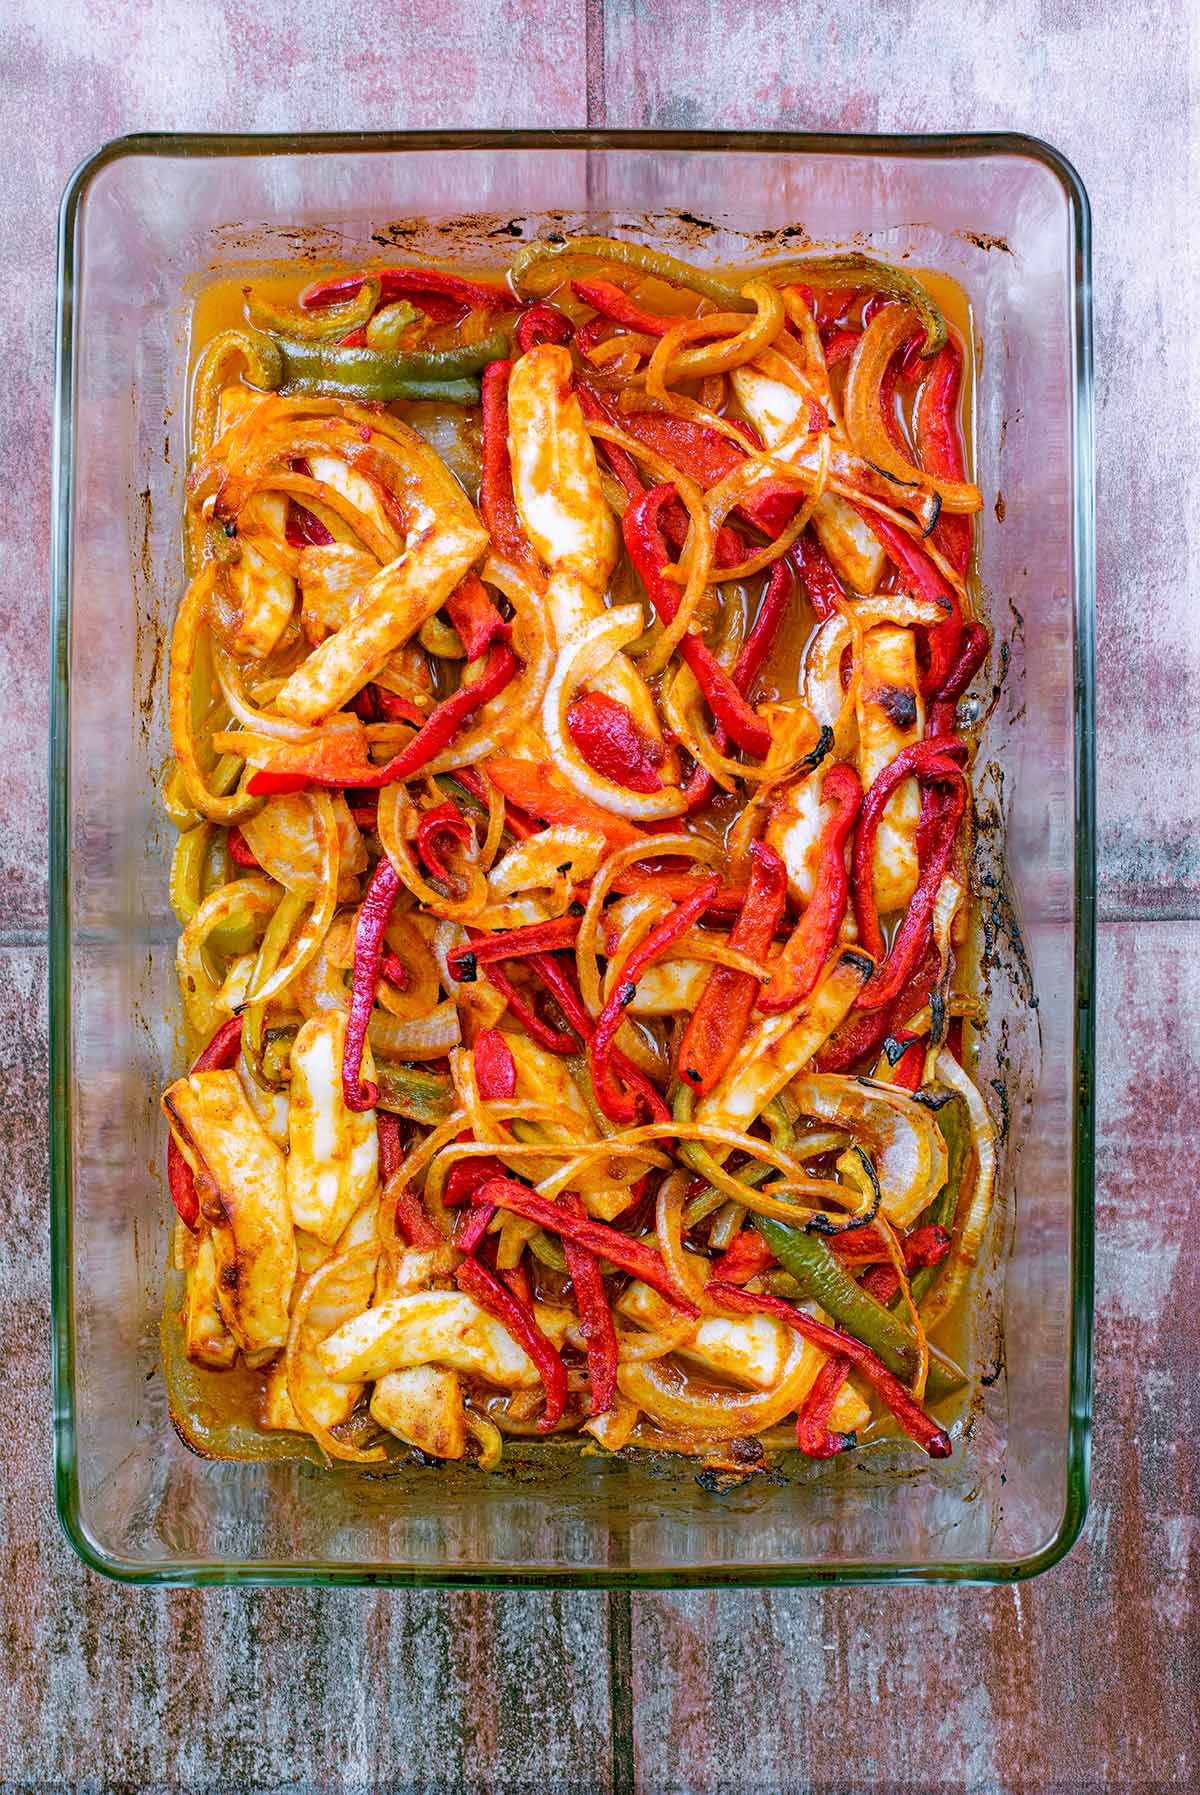 Cooked peppers, onions and halloumi in a baking dish.